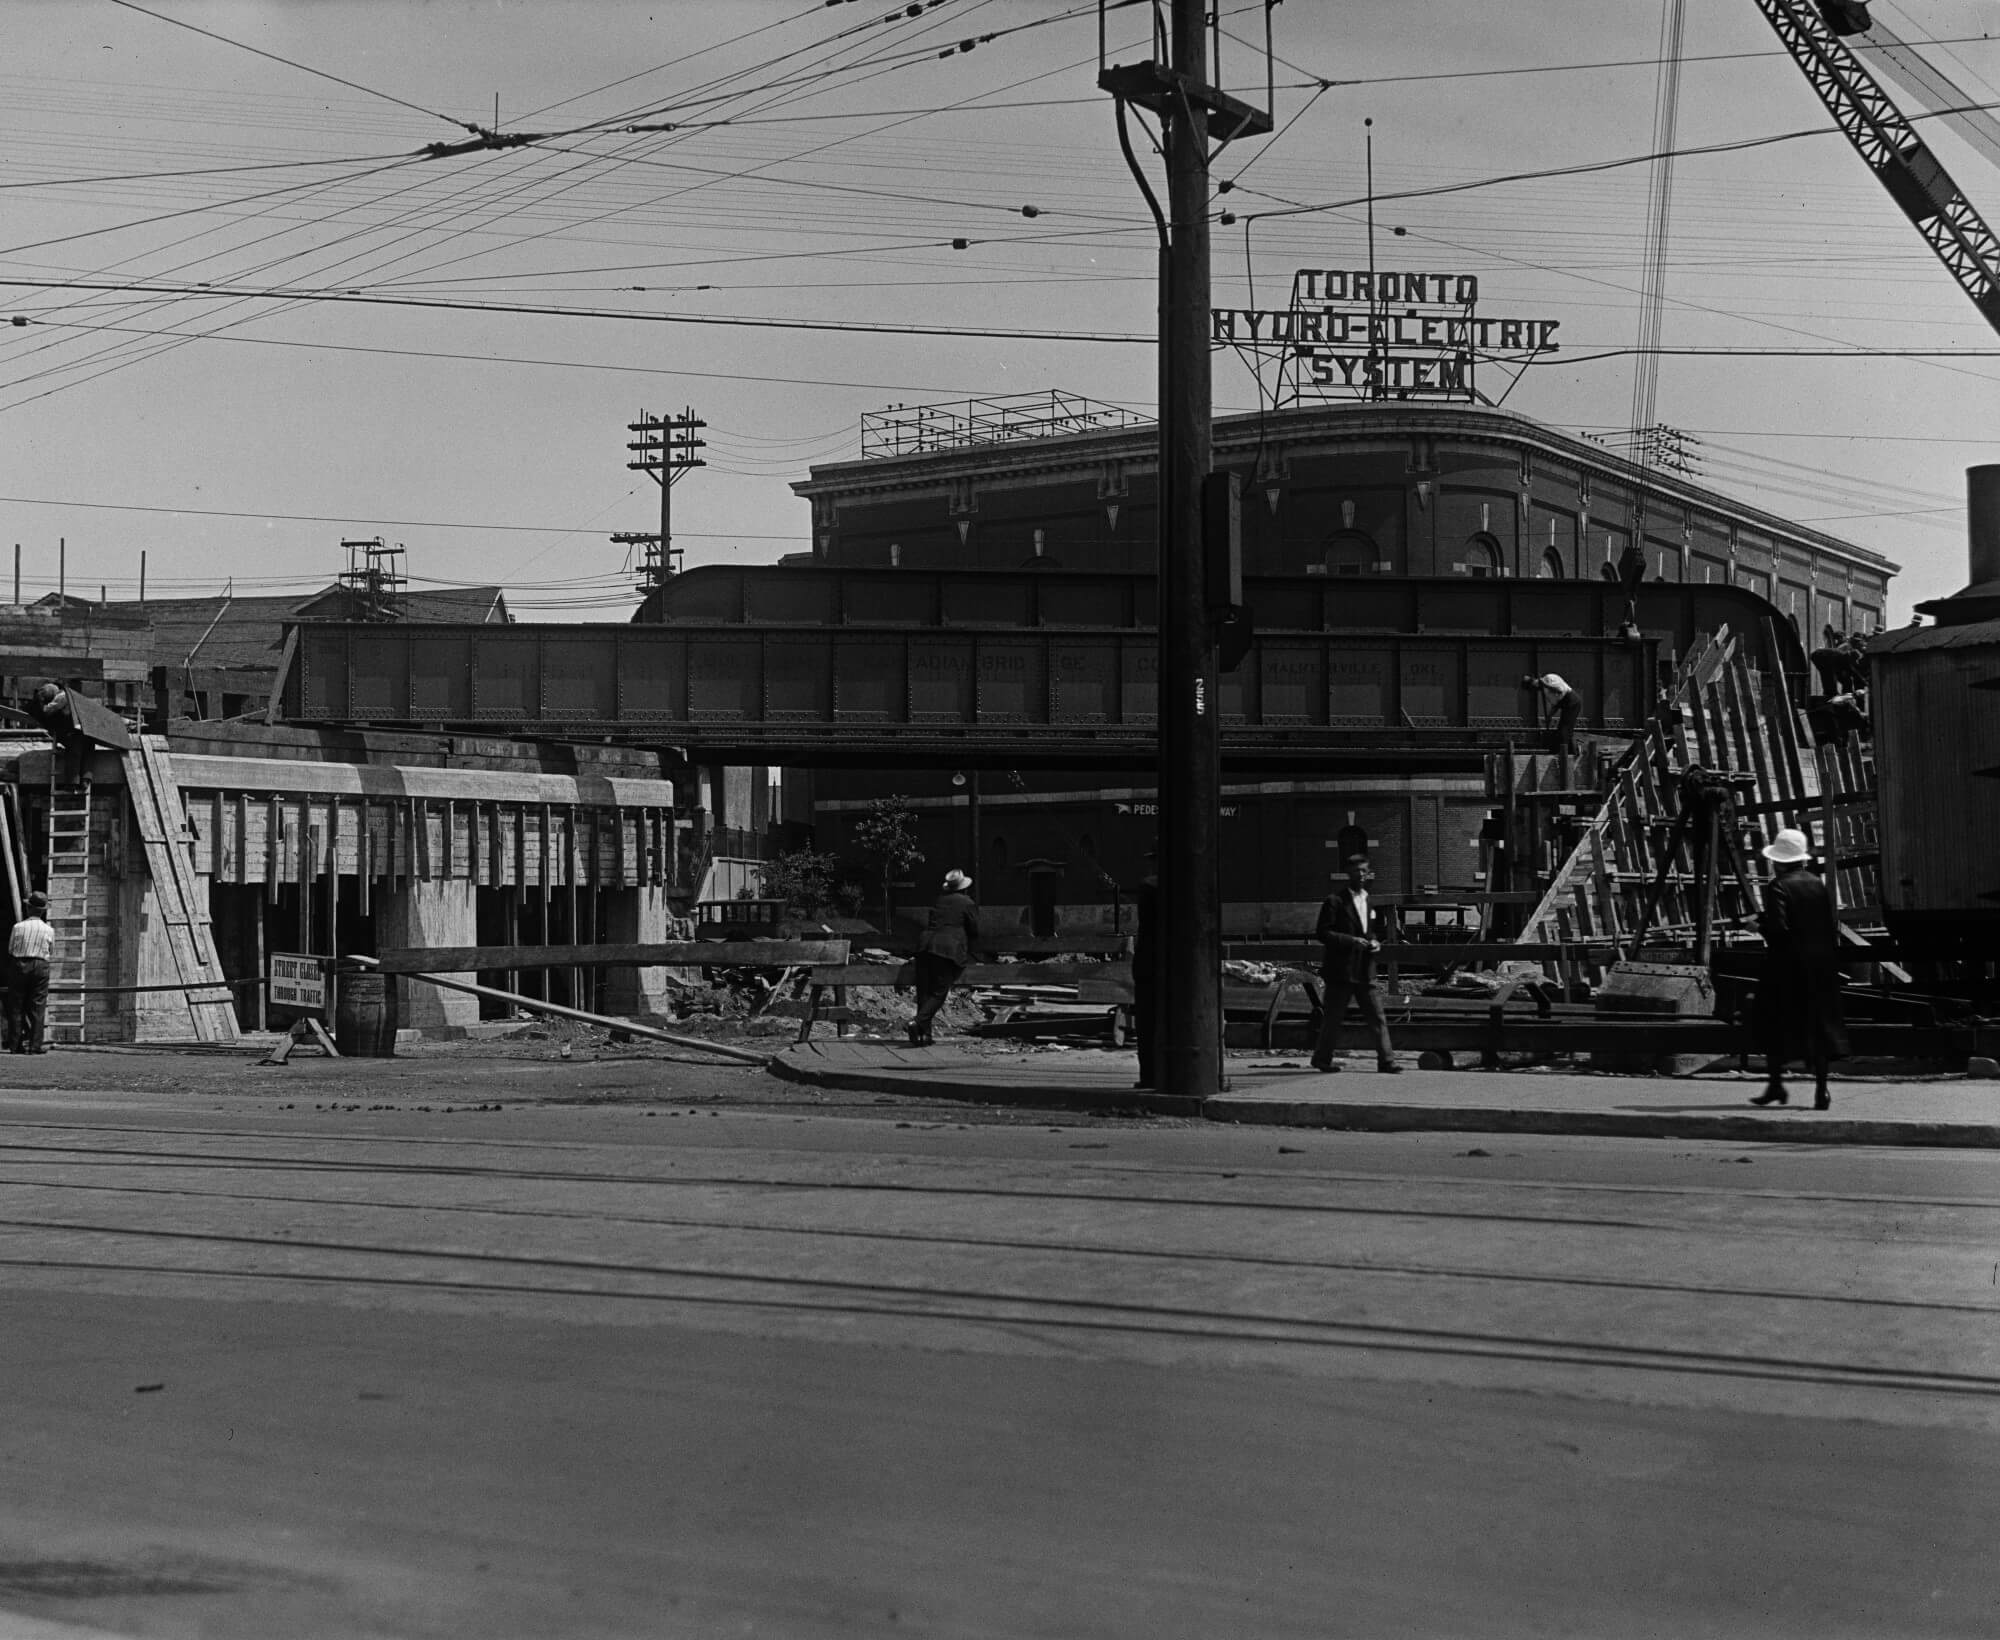 Black and white image of Carlaw Avenue from Gerrard Street East. Workers are building a rail bridge and a Toronto Hydro-Electric System substation is in the background.